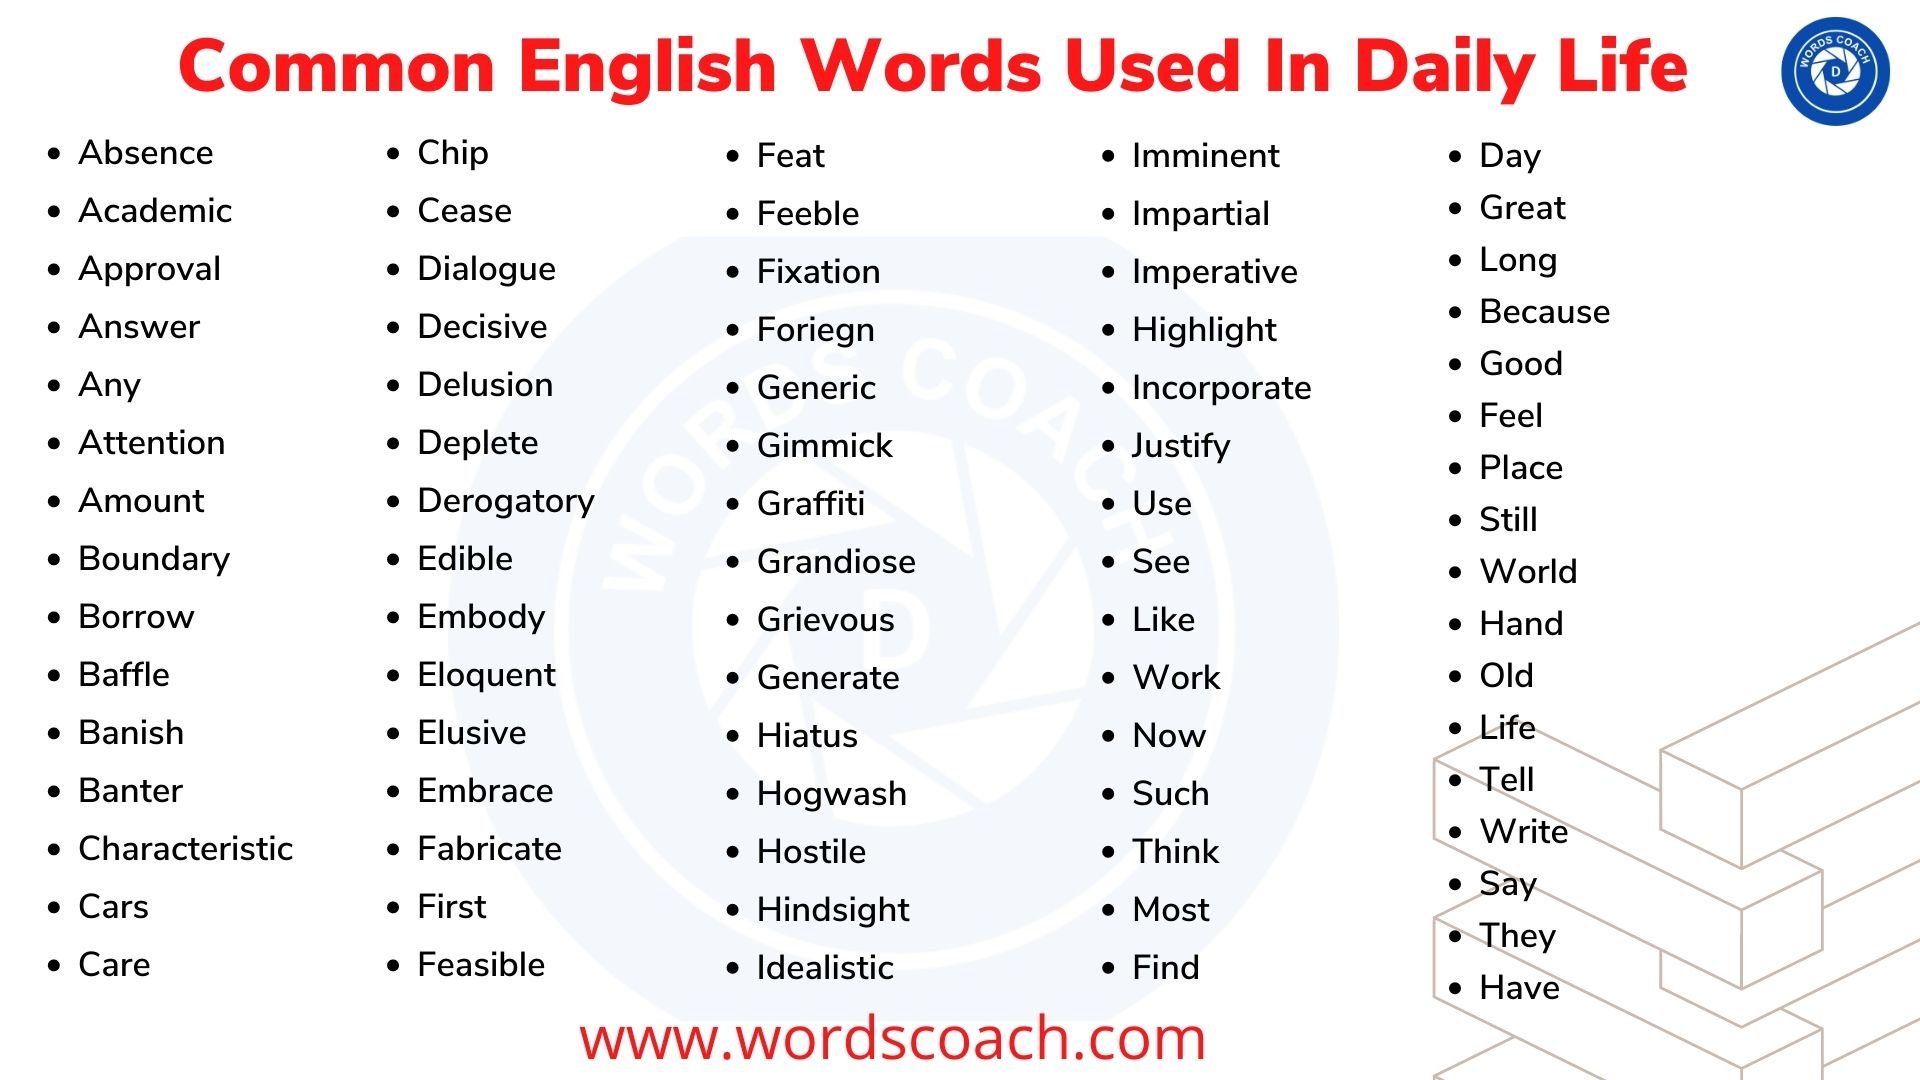 75+ Common English Words Used In Daily Life